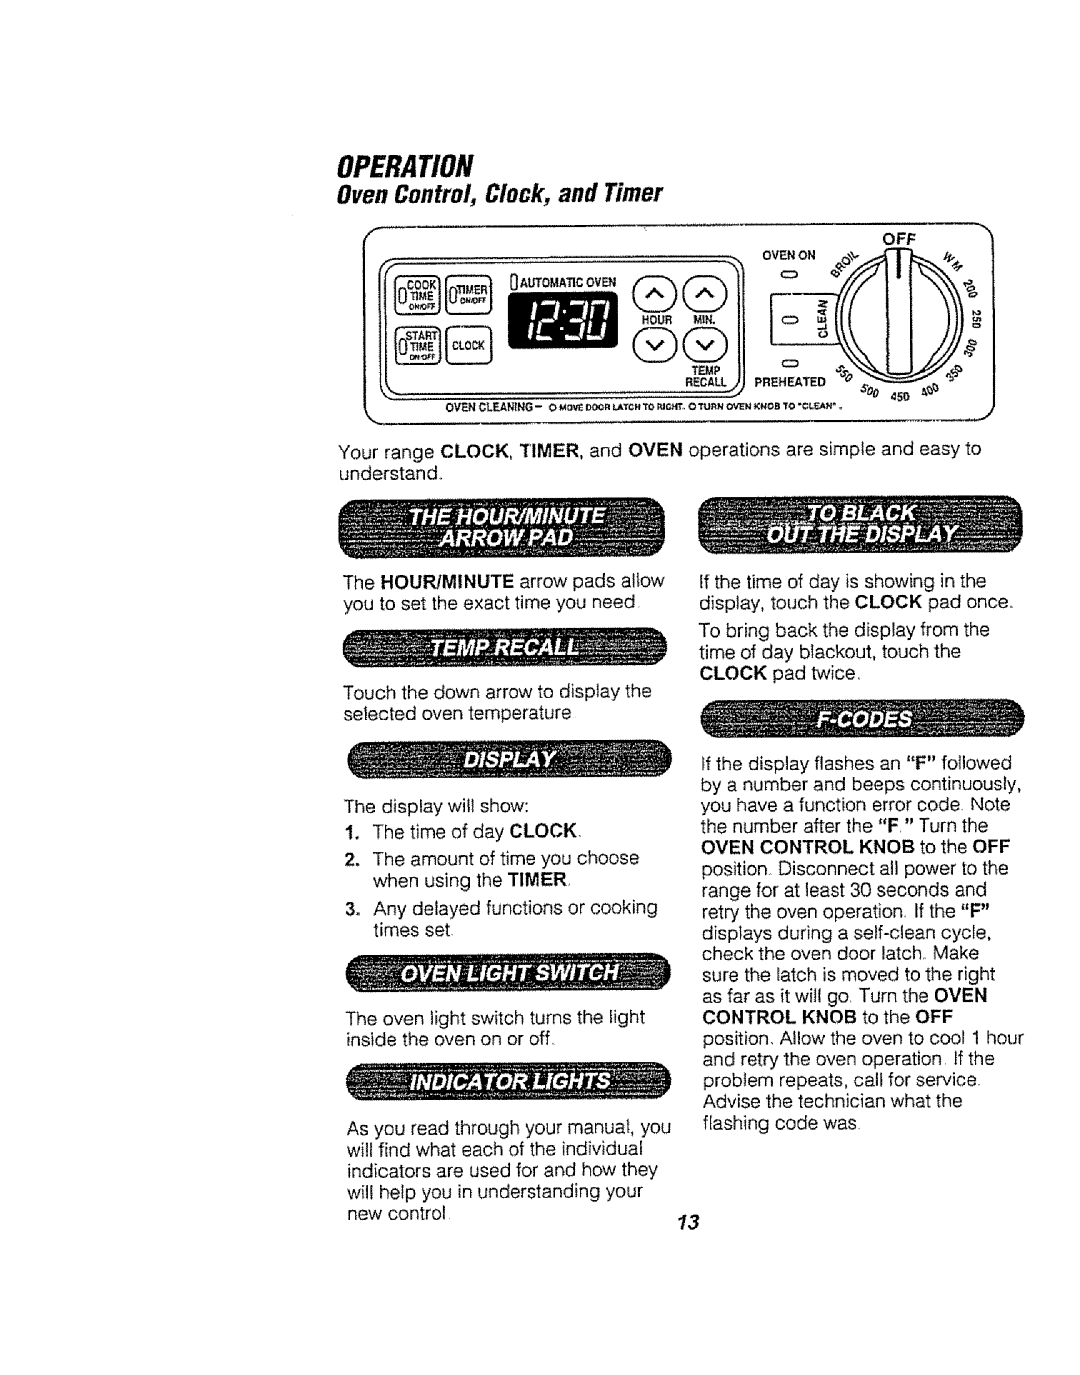 Kenmore 911.94752, 911.94754, 911.94759 manual OvenControl, Clock, and Timer, Operation 